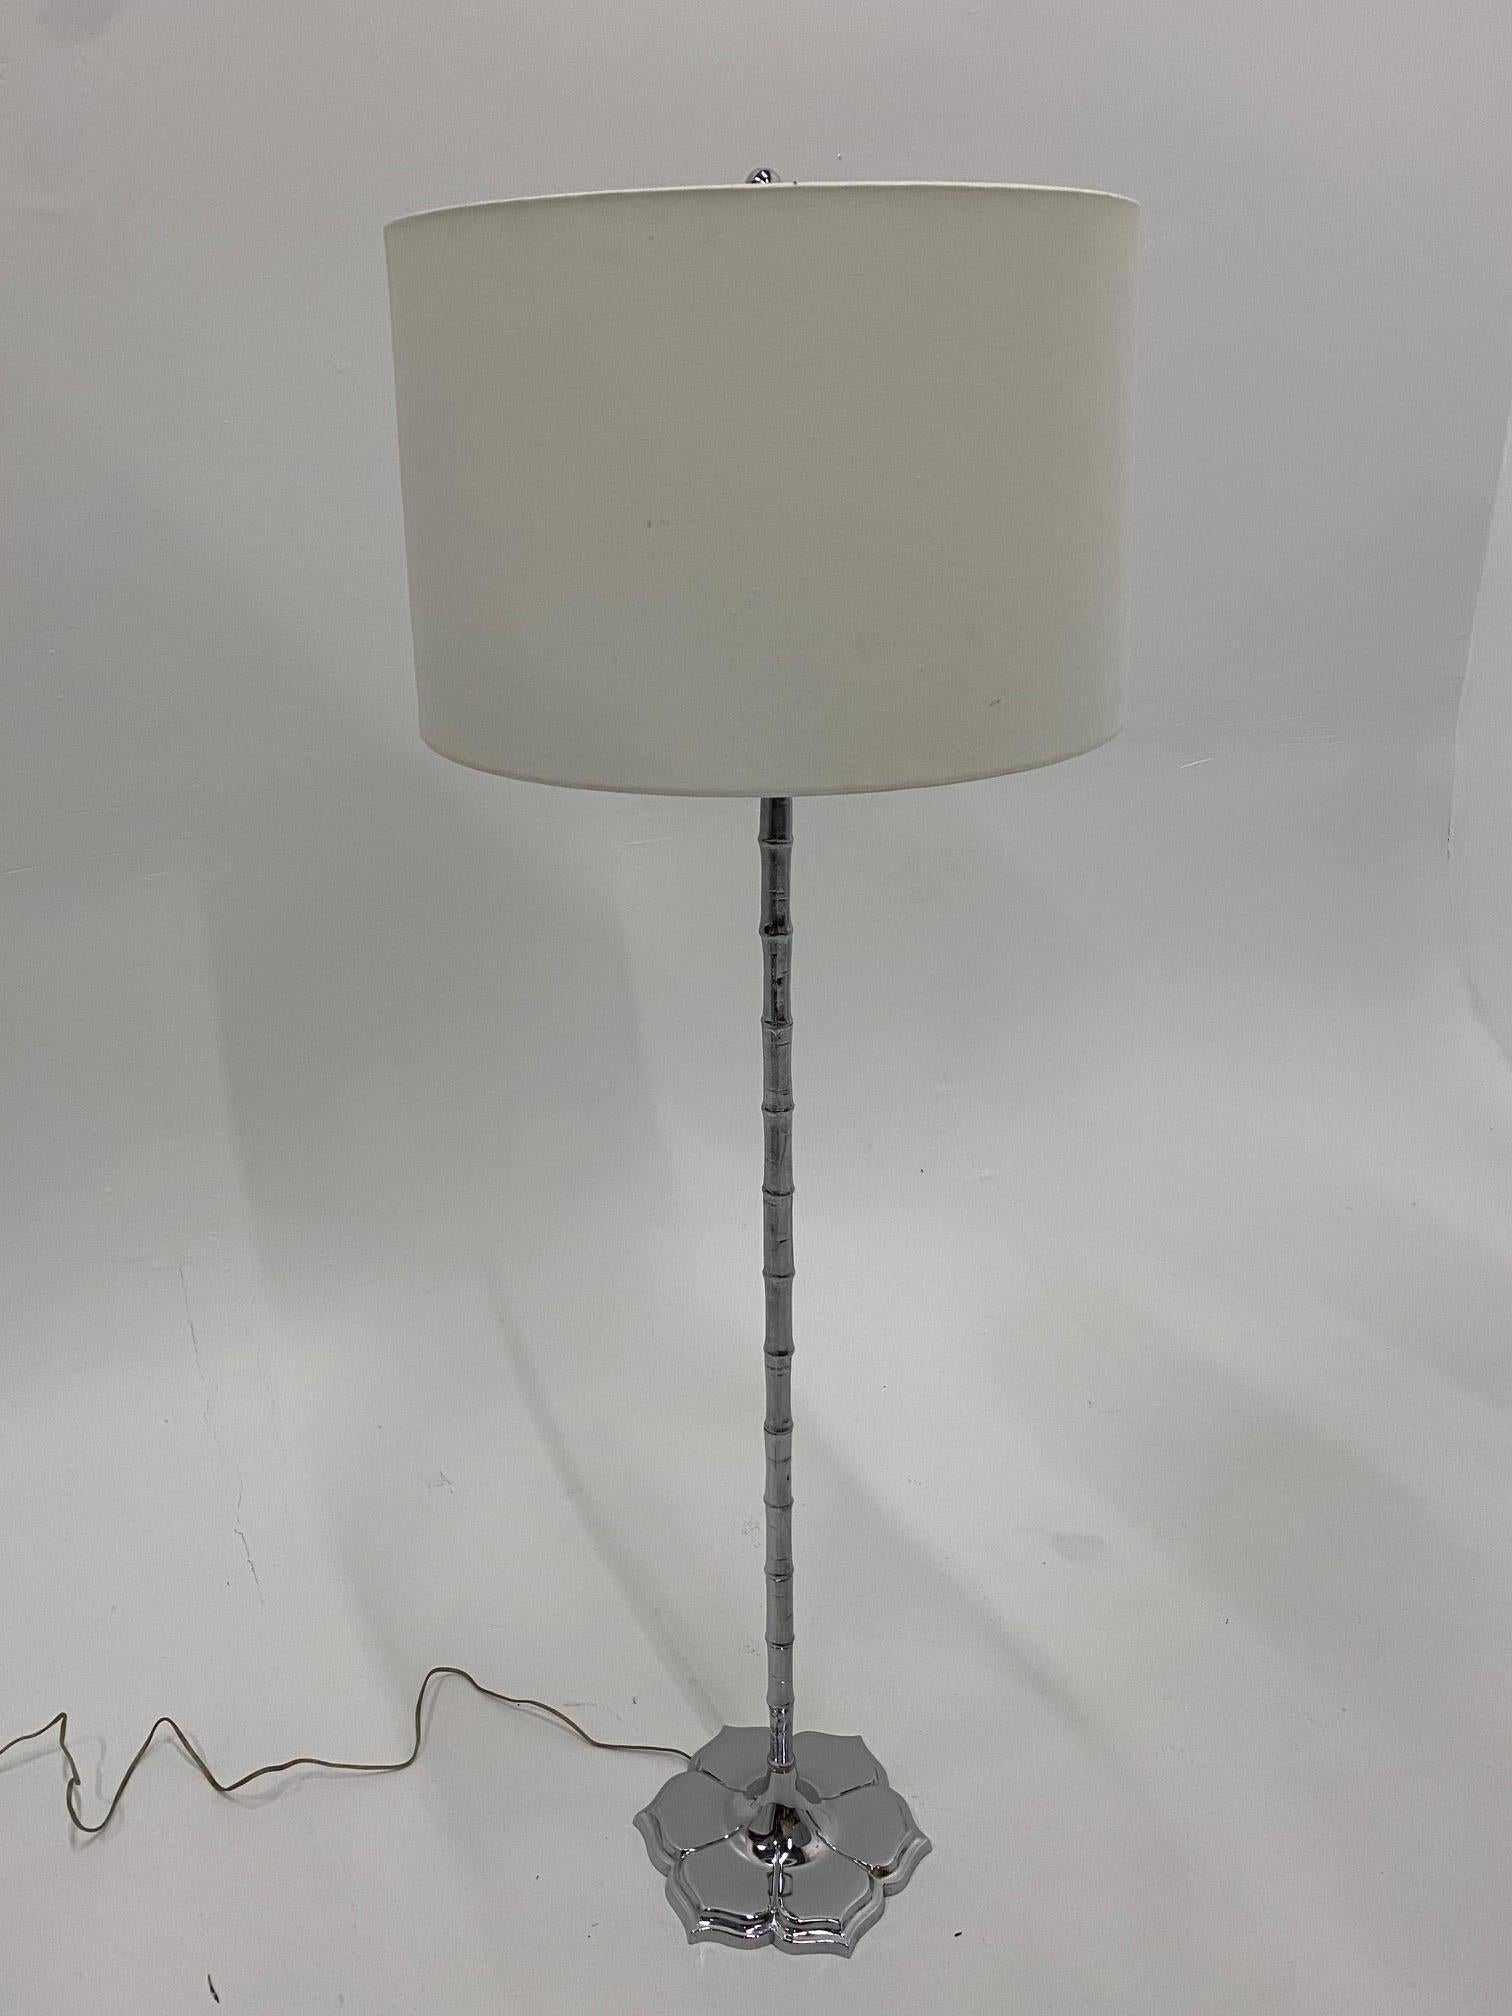 Elegant Mid-Century Modern chrome floor lamp with faux bamboo column and pretty lotus flower shaped base.
Shade not included.